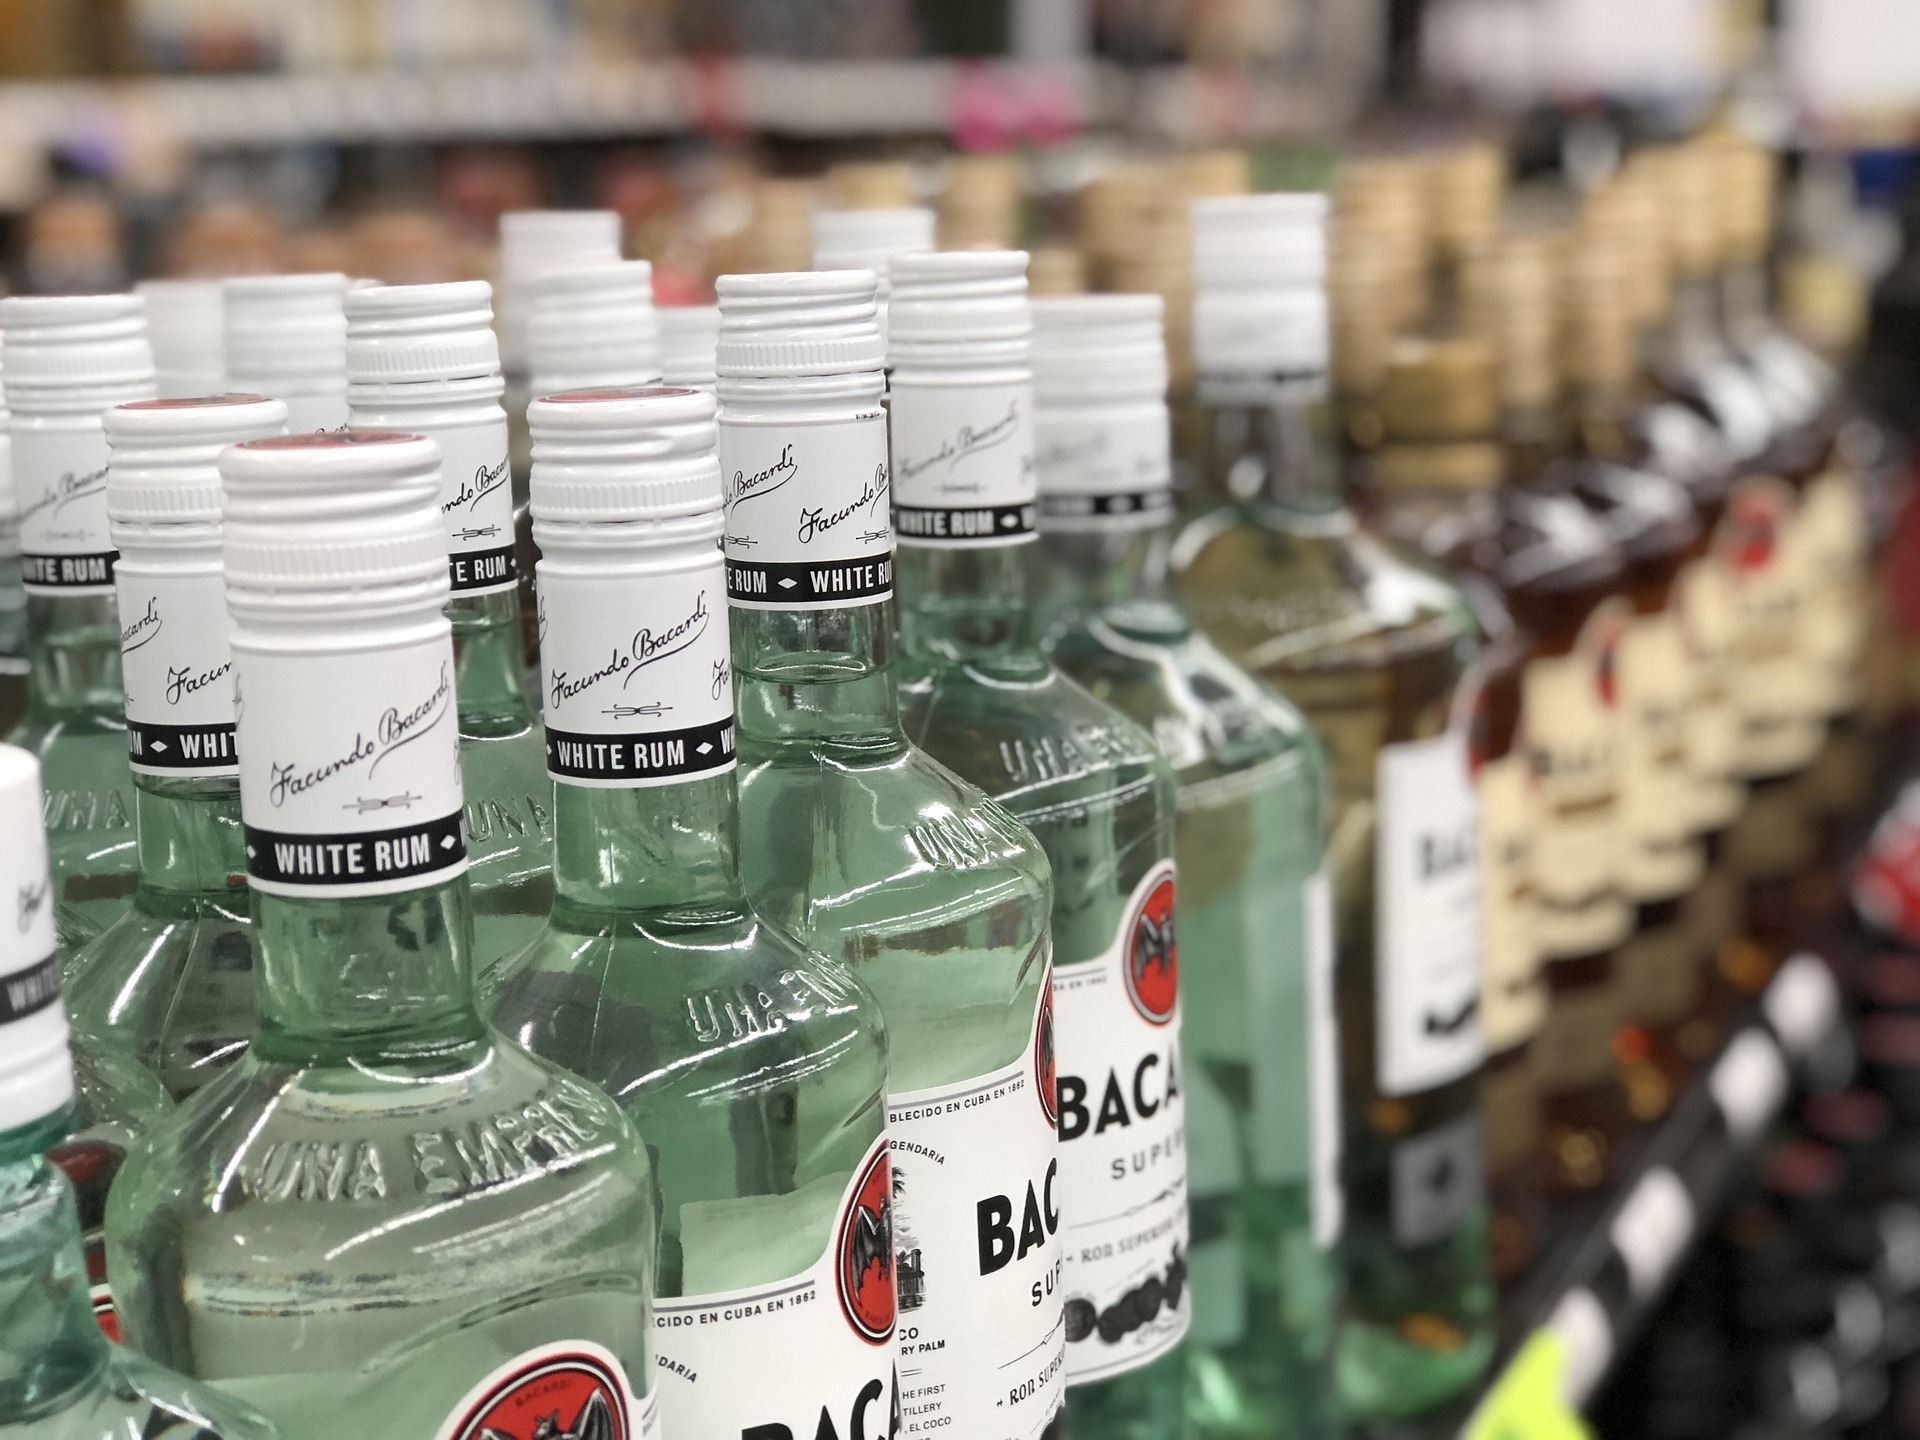 Absentee Run Liquor Store For Sale in New York